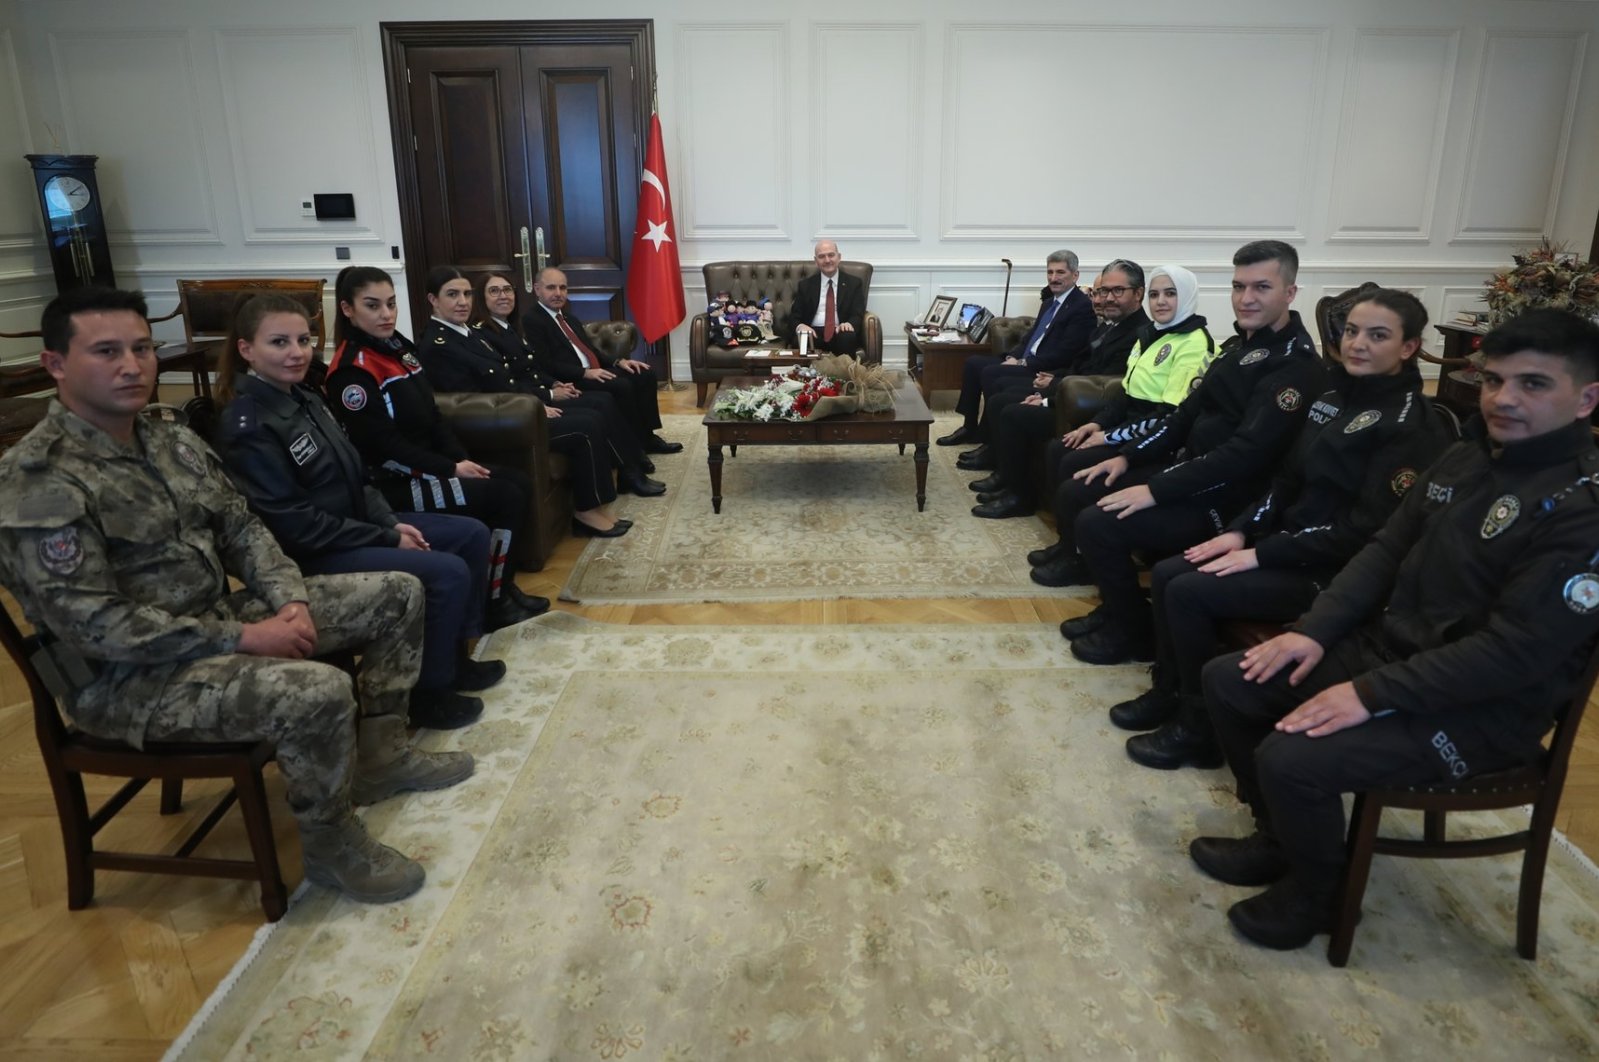 Interior Minister Süleyman Soylu receives a delegation of police officers in the capital Ankara, Turkey, April 6, 2022. (DHA Photo)